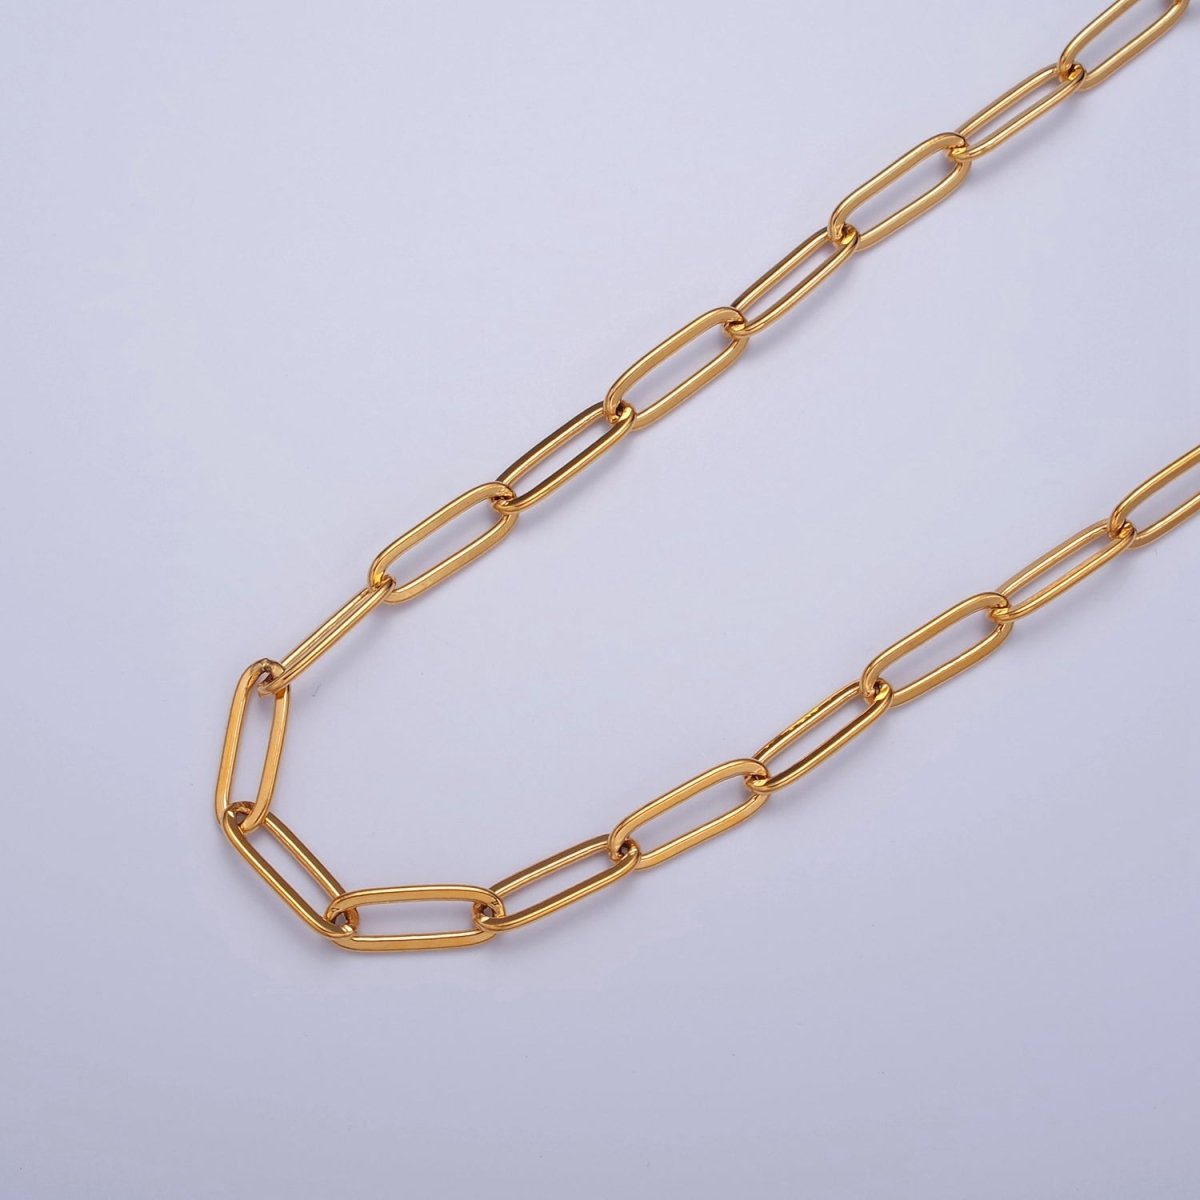 18K Gold Filled 14mm x 5mm Dainty Paperclip Cable 19.5 Unfinished Chain by Meter | WA-1384 Clearance Pricing - DLUXCA